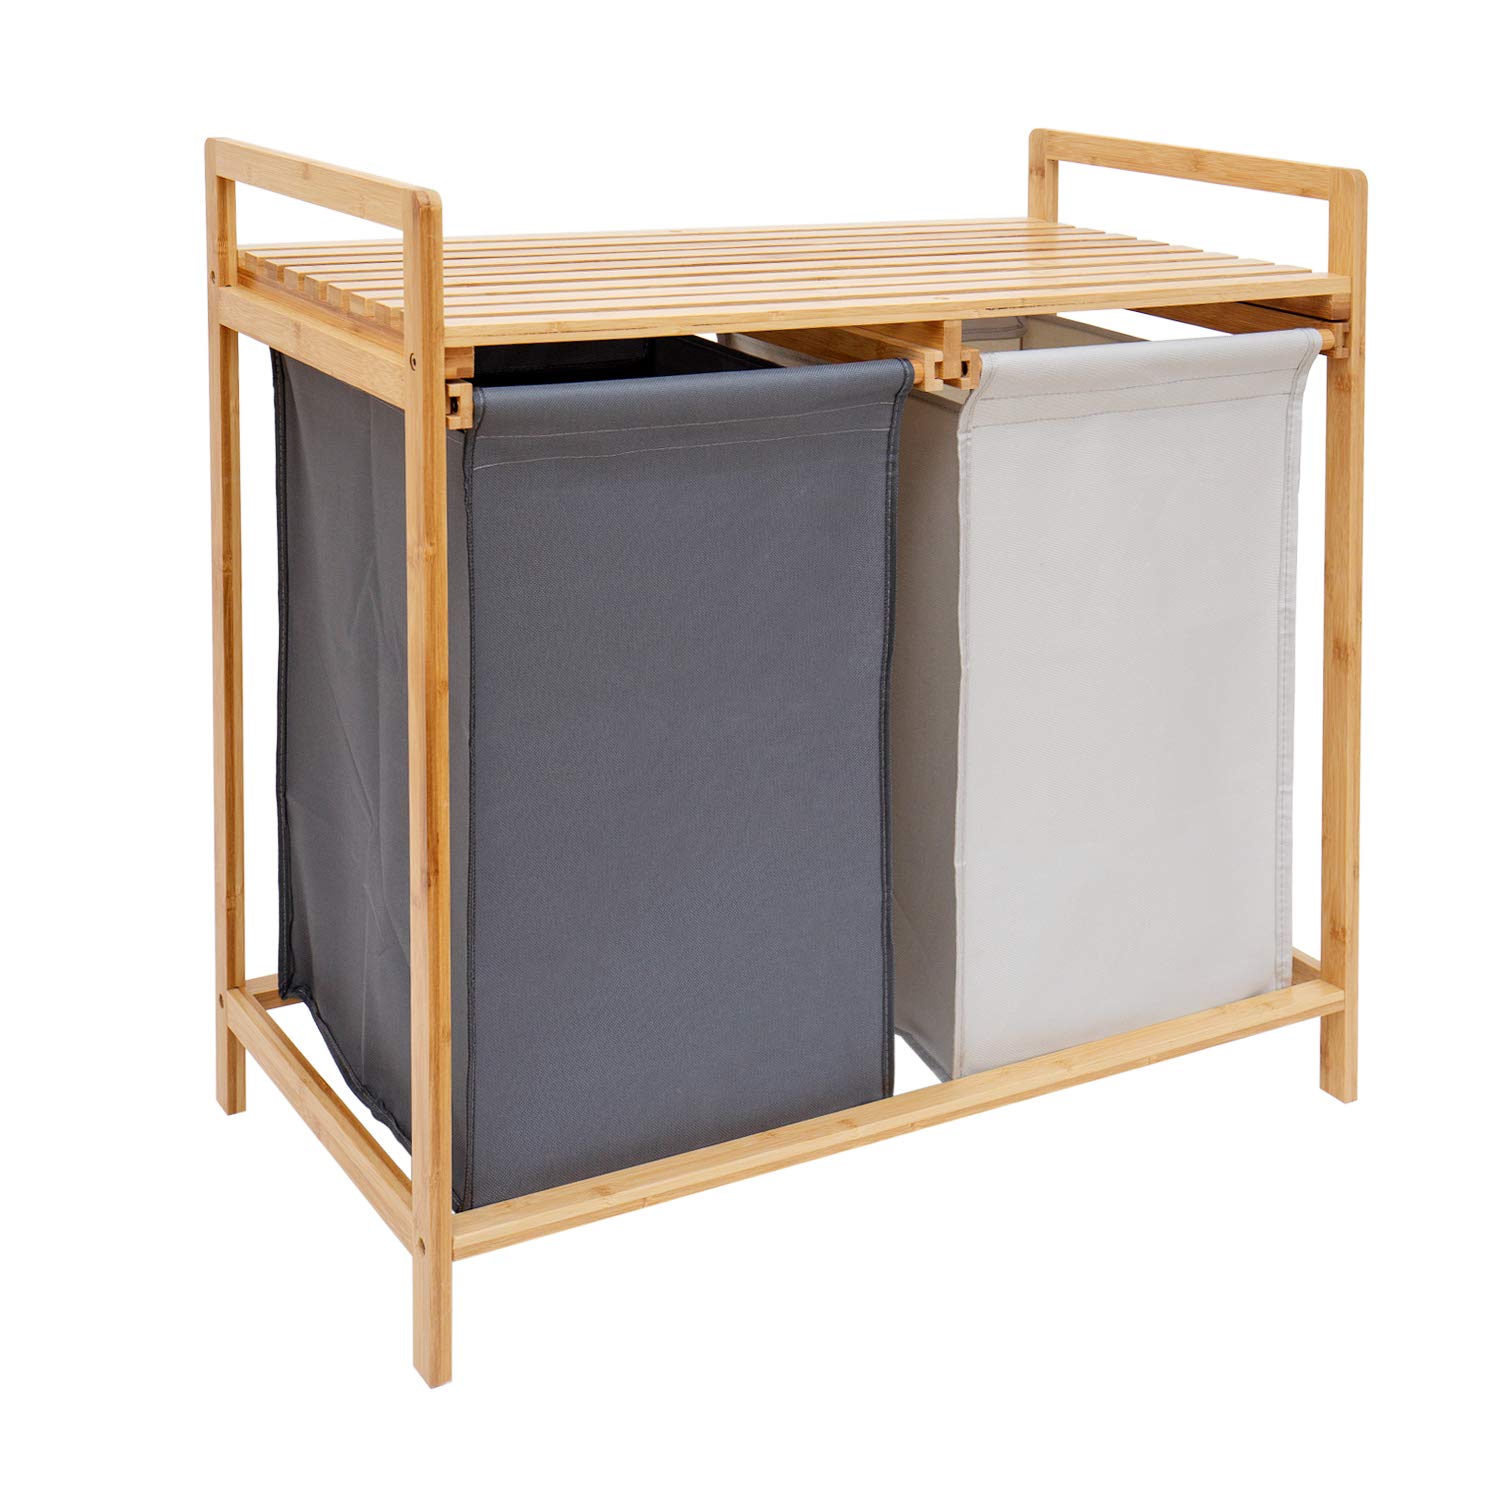 COMELLOW Bamboo Laundry Hamper and Shelf